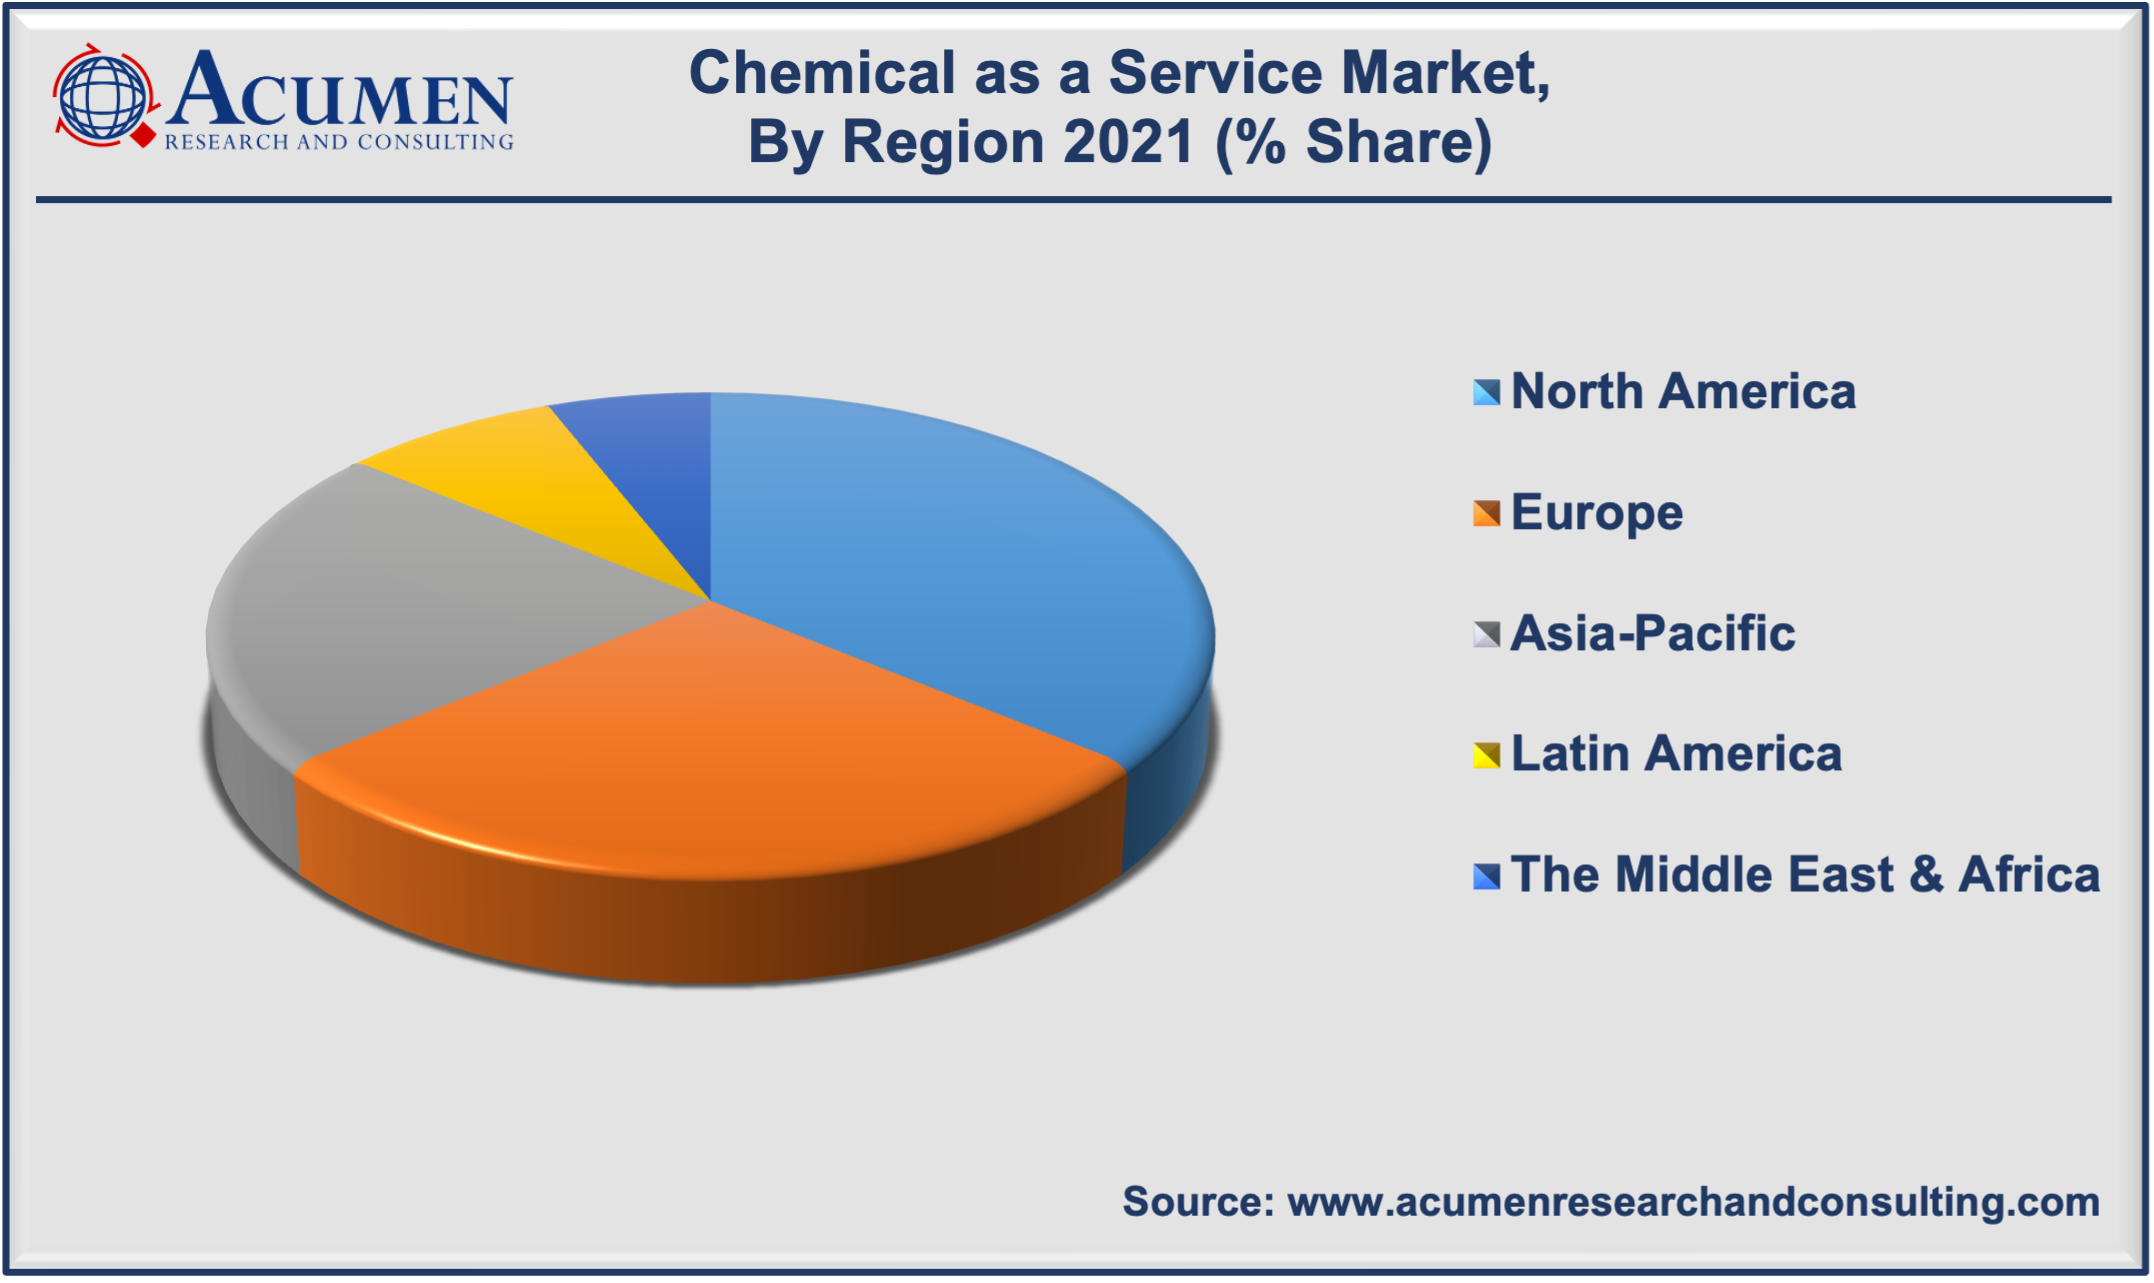 Chemical as a Service Market Analysis accounted for USD 8,101 Million in 2021 and is estimated to reach the value of USD 15,581 Million by 2030.